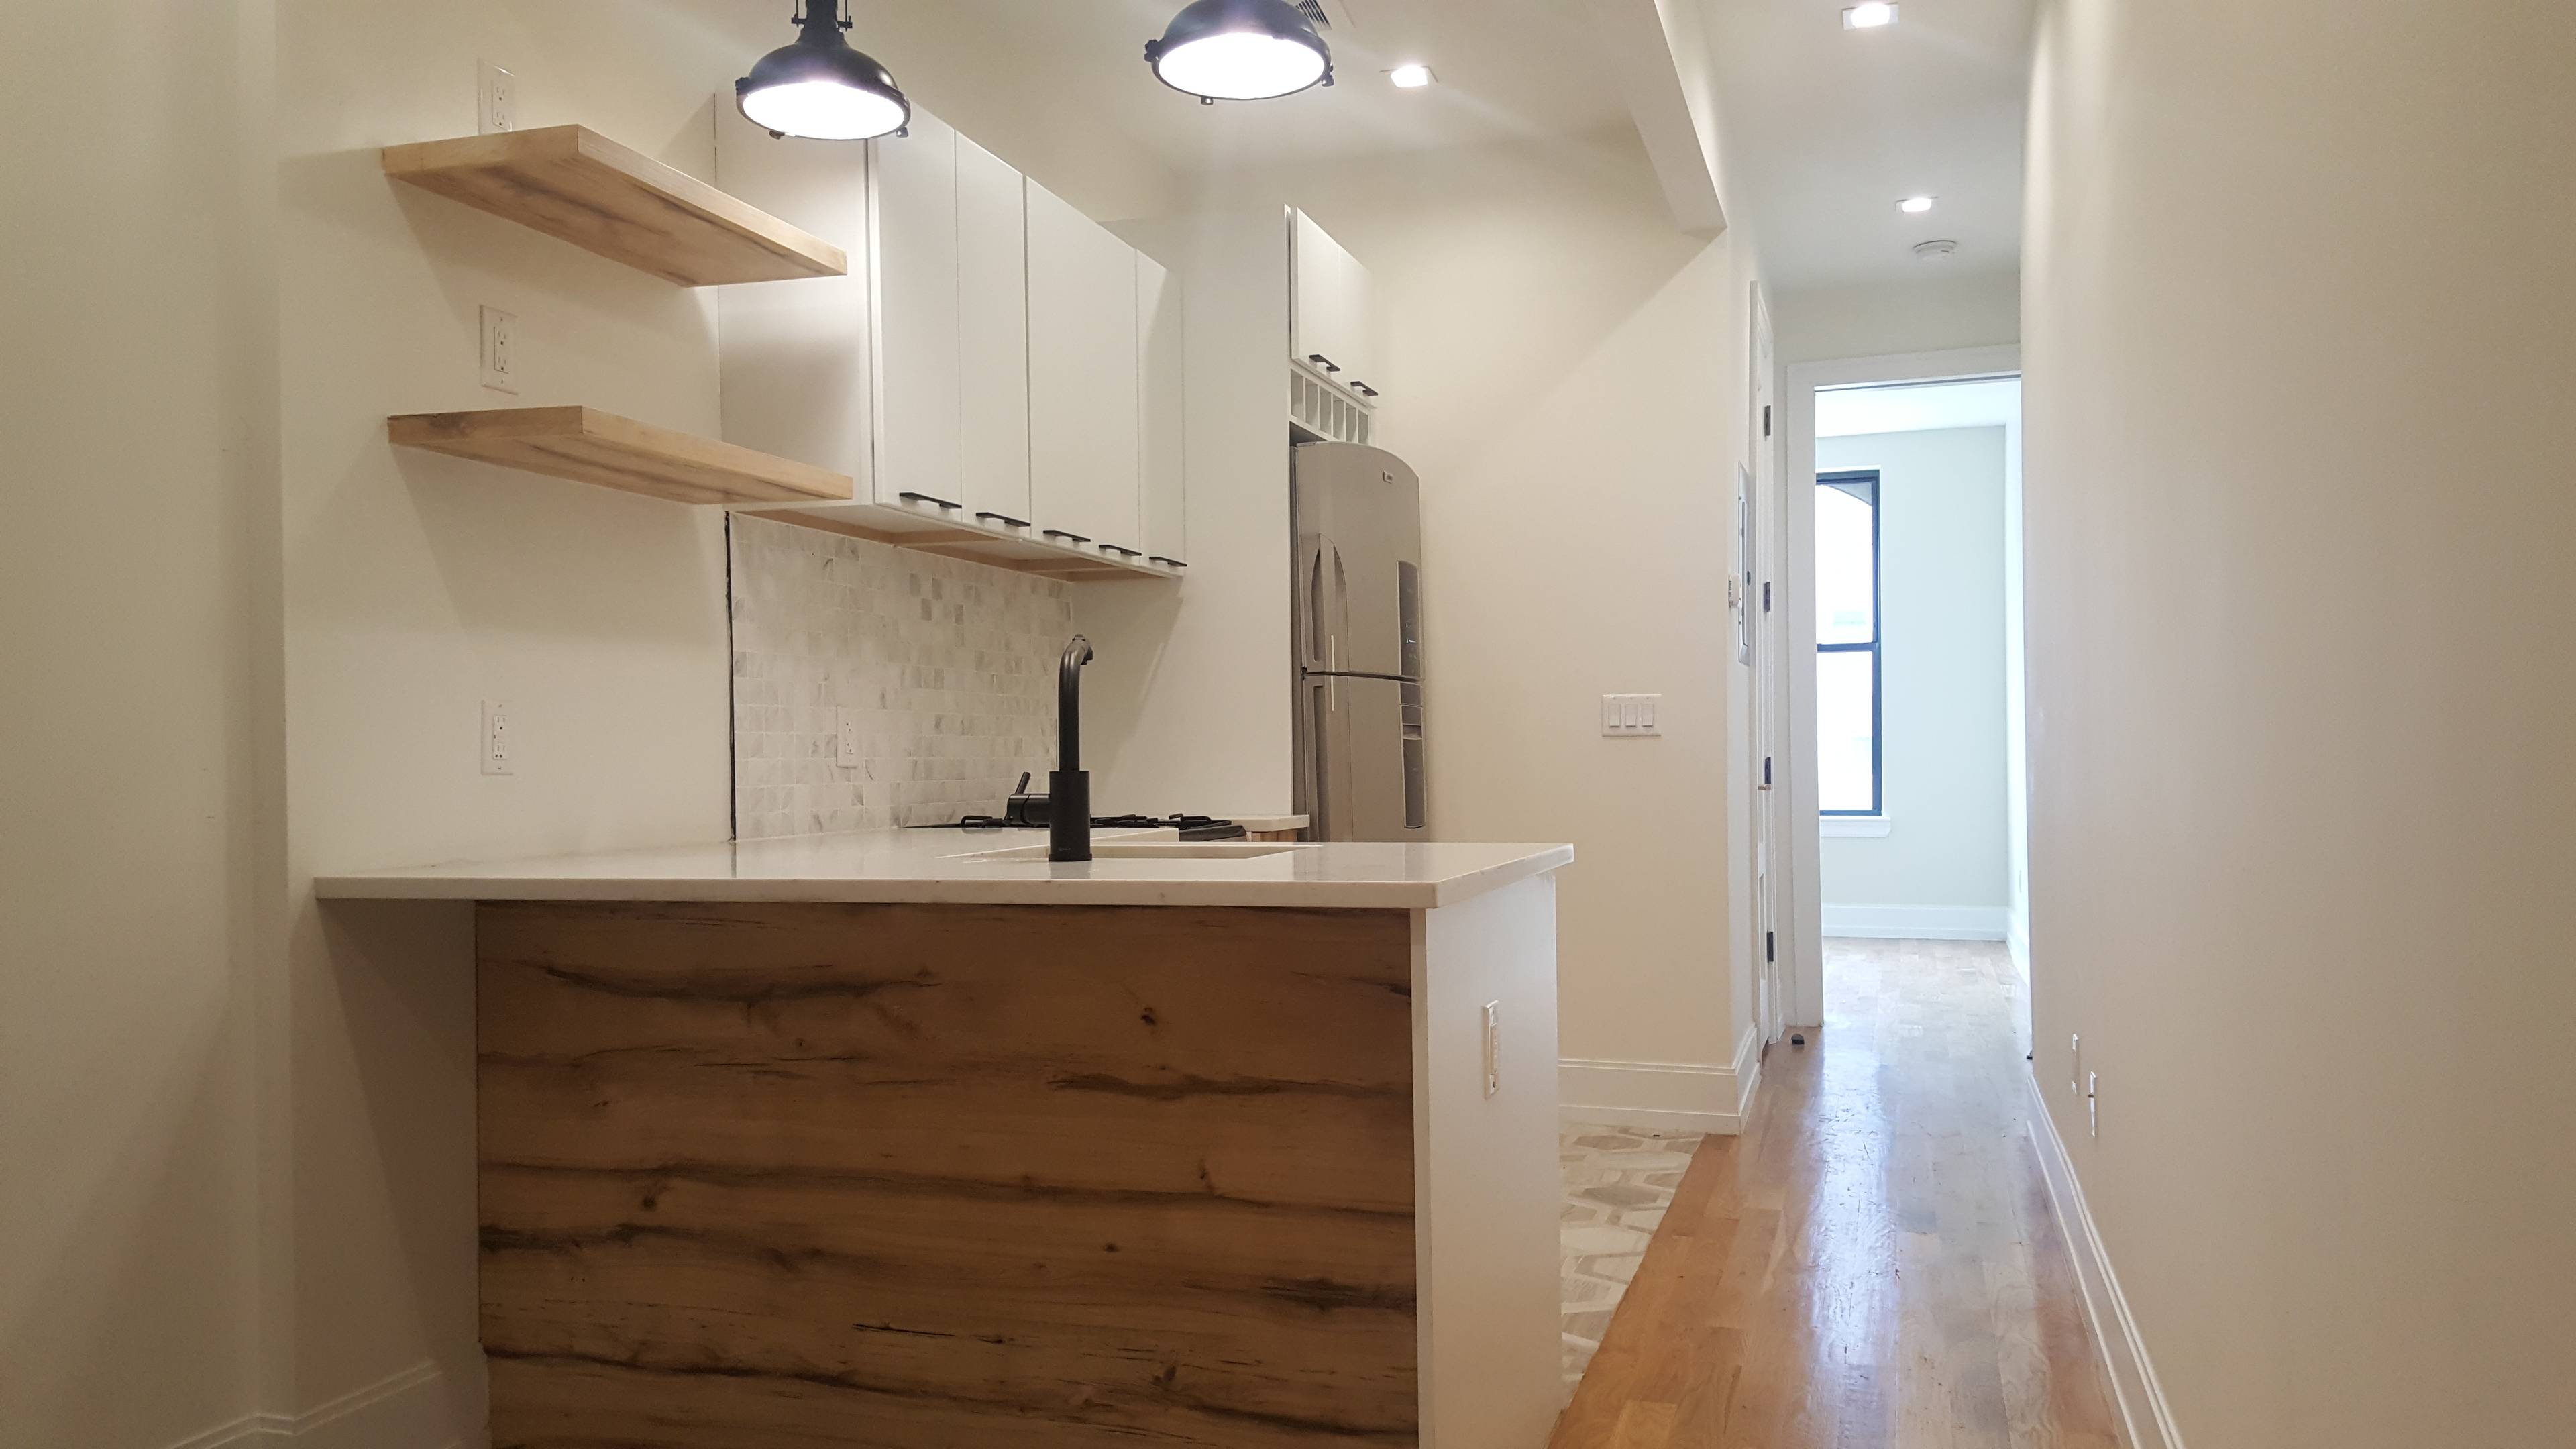 Spacious NO FEE Duplex 2 Bedroom w/2.5 Bathrooms in Great Crown Heights Location Close to Train